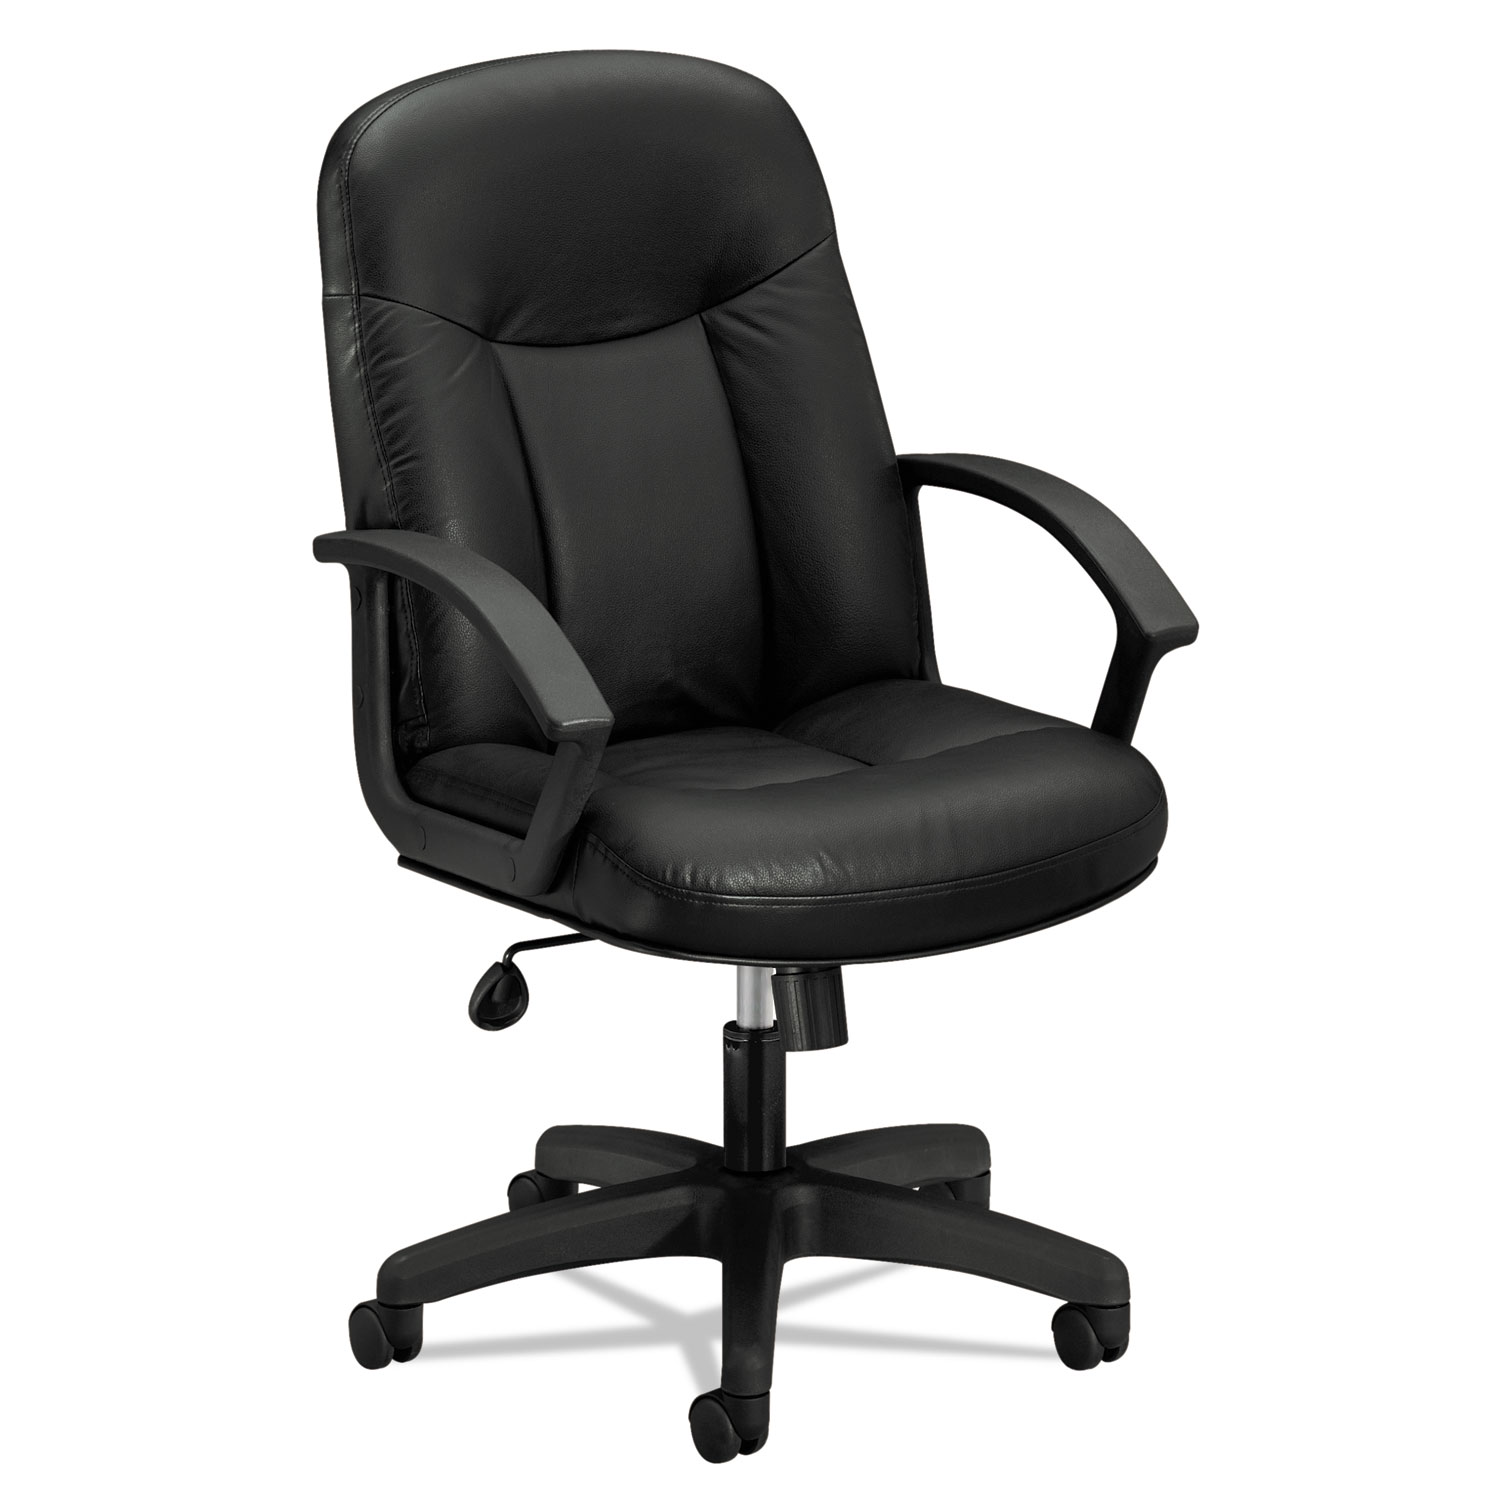  HON HVL601.SB11 HVL601 Series Executive High-Back Leather Chair, Supports up to 250 lbs., Black Seat/Black Back, Black Base (BSXVL601SB11) 